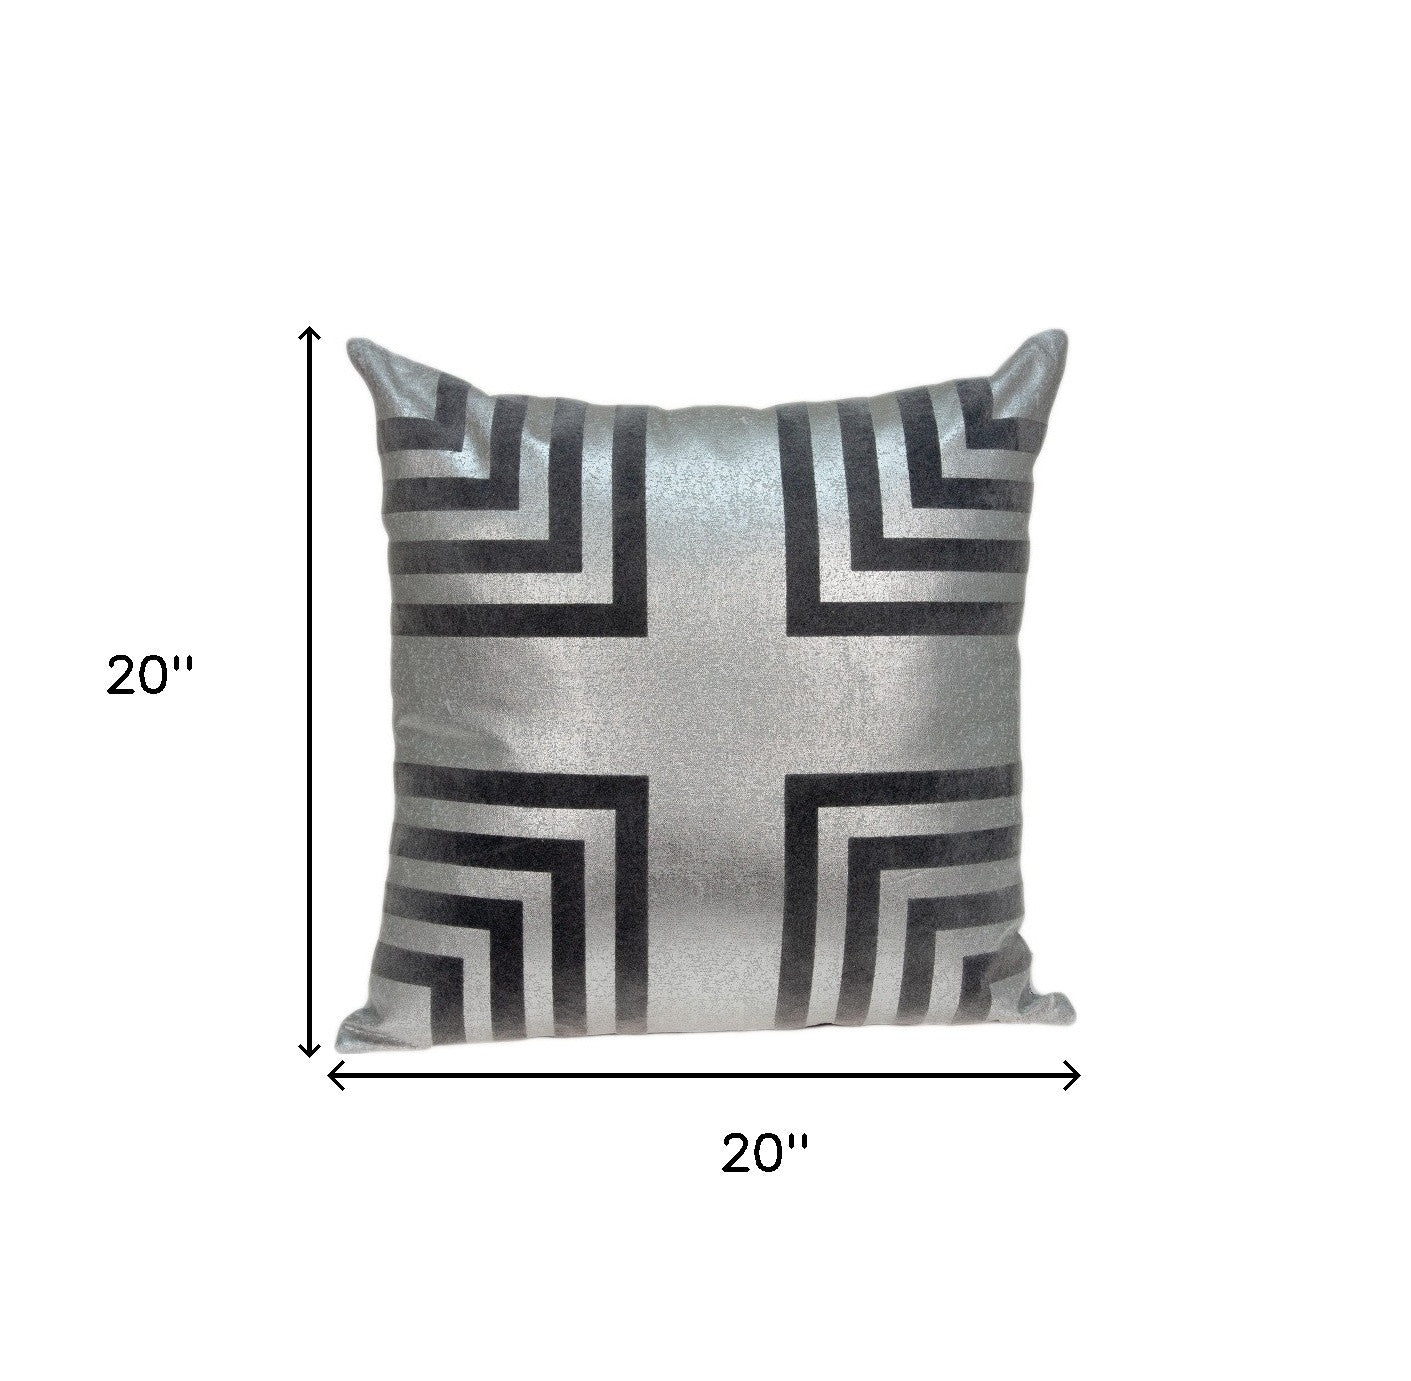 20" X 7" X 20" Transitional Gray Cotton Accent Pillow Cover With Poly Insert